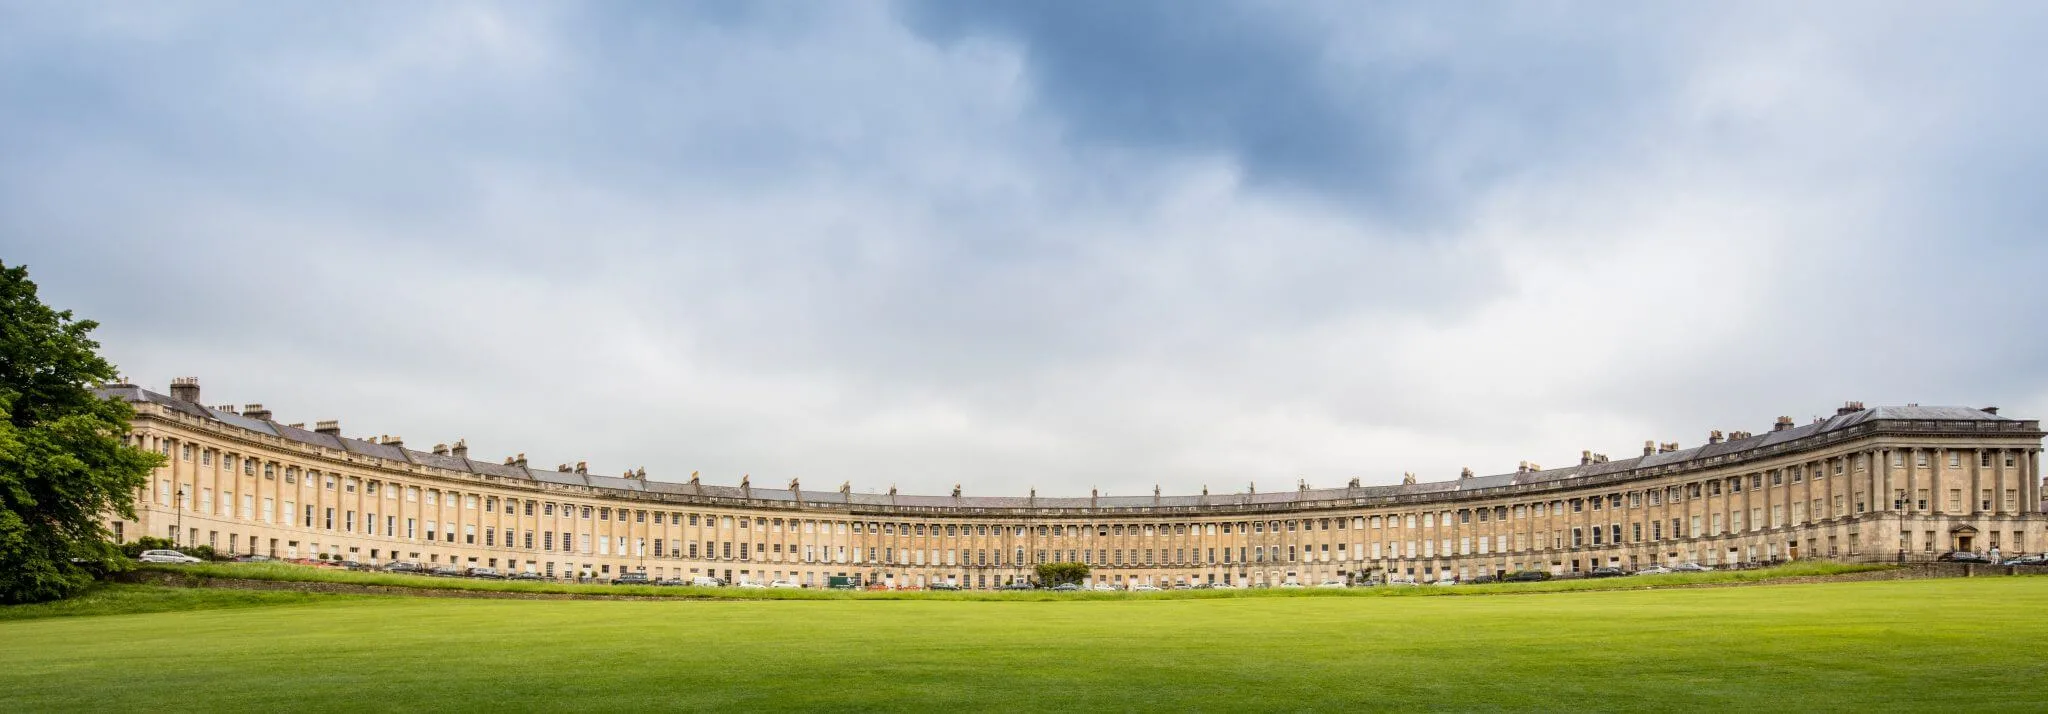 24 hours in bath